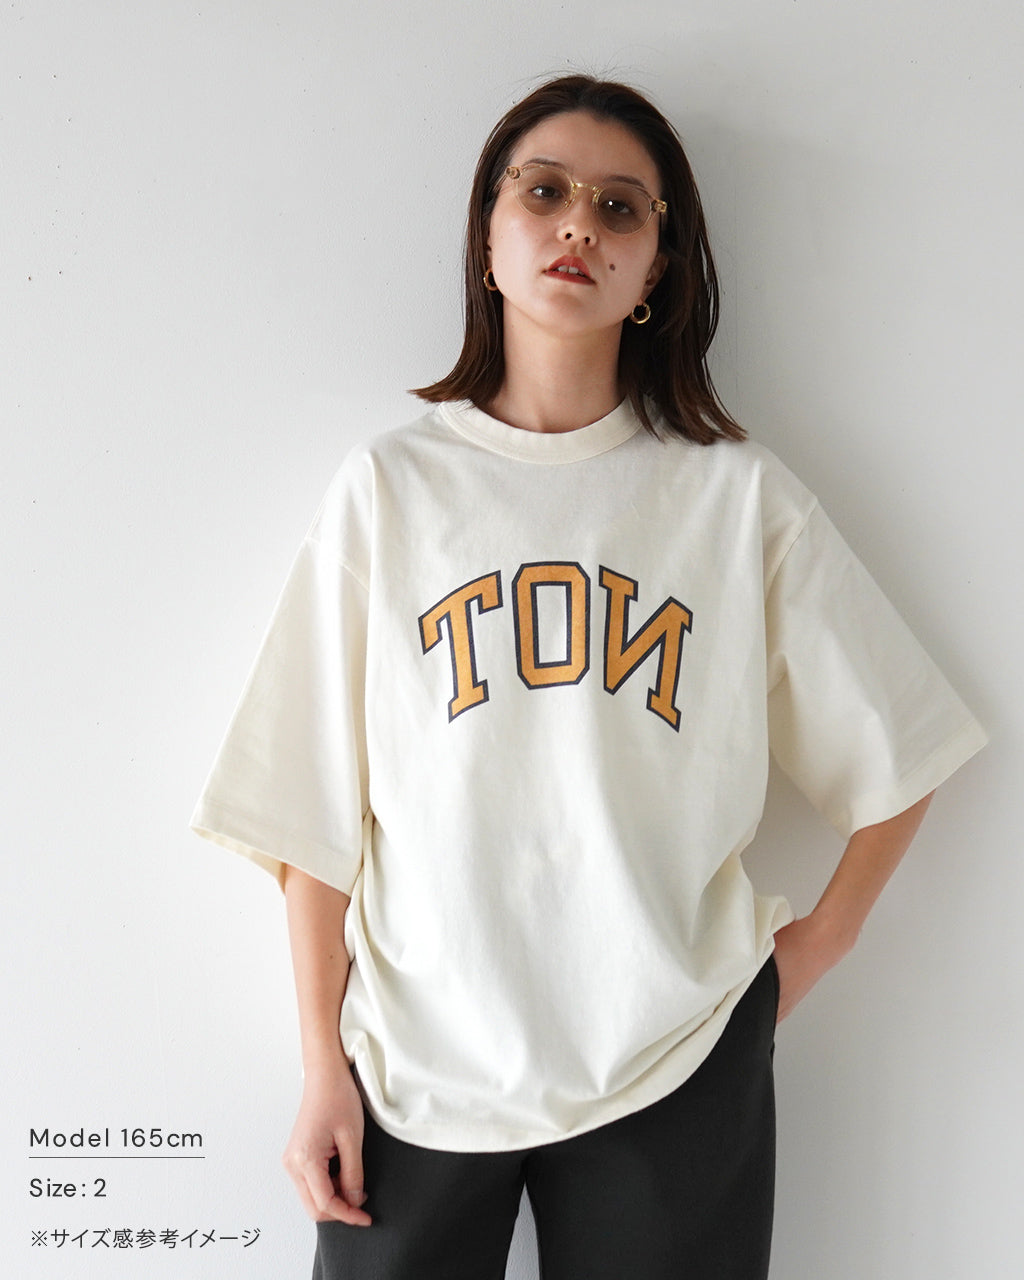 blurhms ROOTSTOCK ブラームス ルーツストック プリント Tシャツ ワイド CHIC-AGO 88/12 Print Tee WIDE【送料無料】正規取扱店